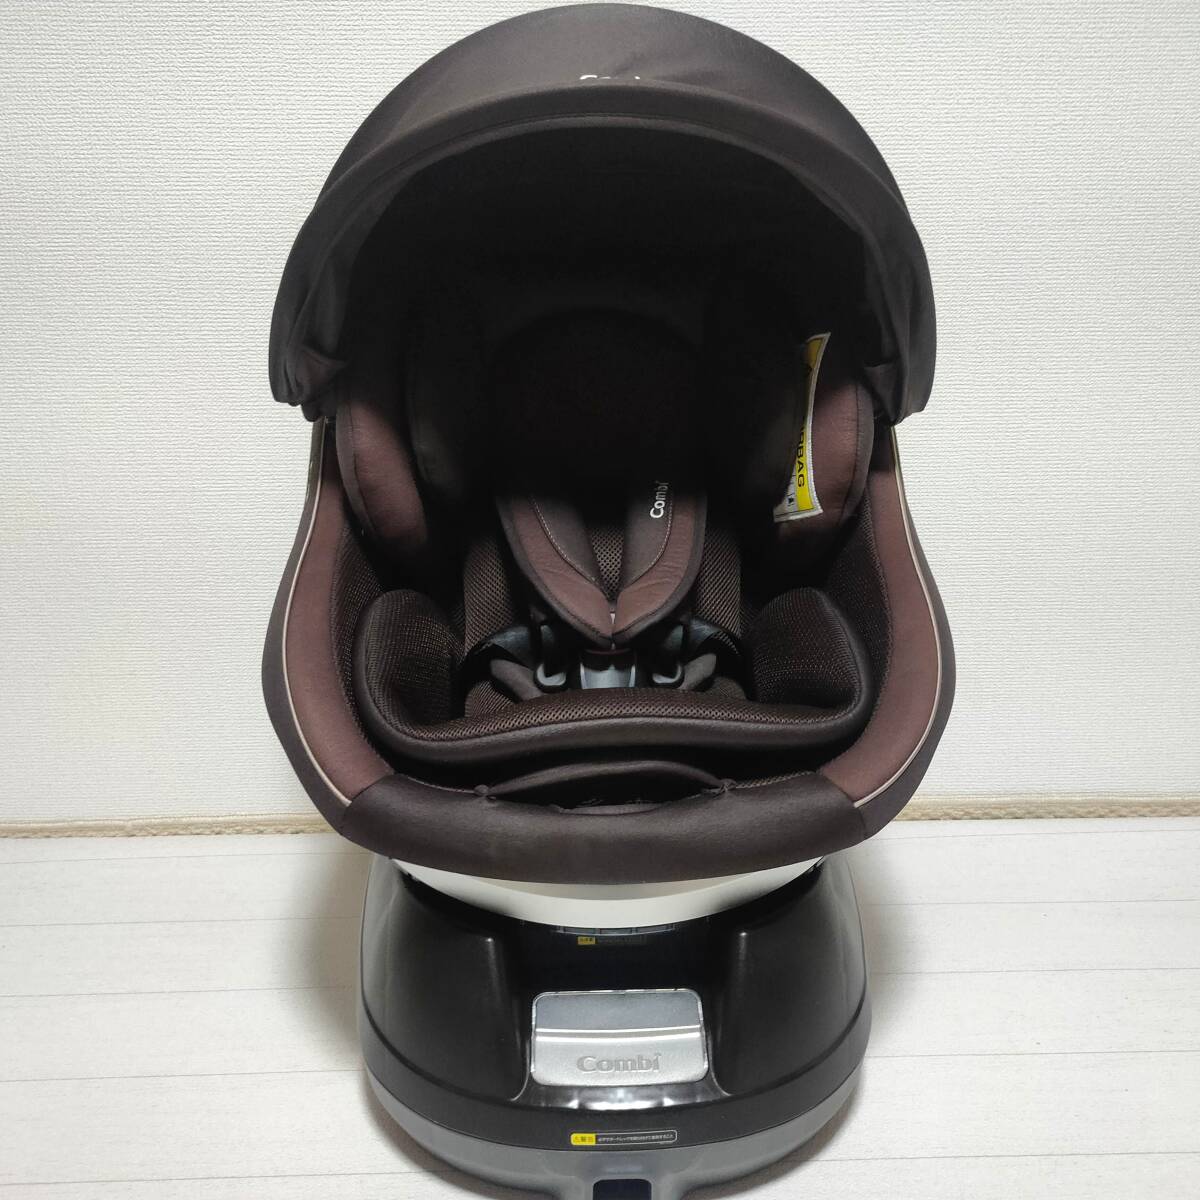 [ including carriage ] combination beautiful goods top model kru Move Smart eg shock child seat rotation Turn newborn baby ~ Pro cleaning settled 